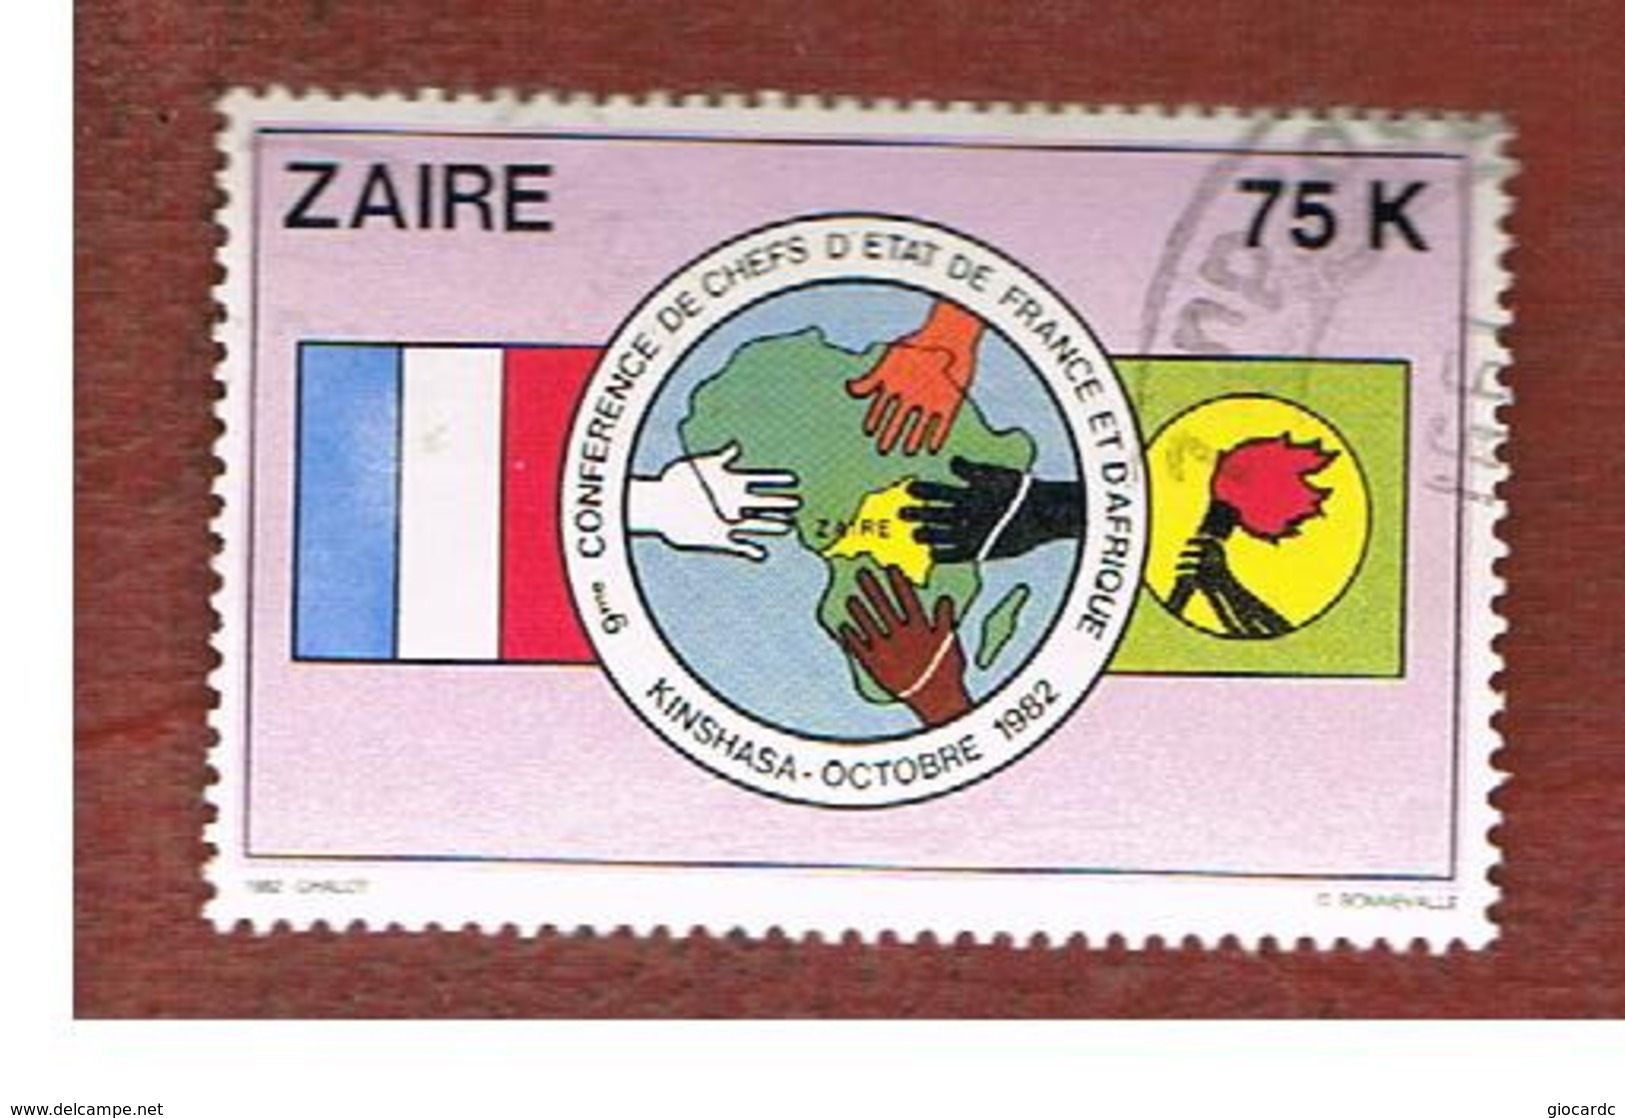 ZAIRE  -  SG 1113 -  1982  FRENCH-AFRICA CONFERENCE   - USED ° - Usados